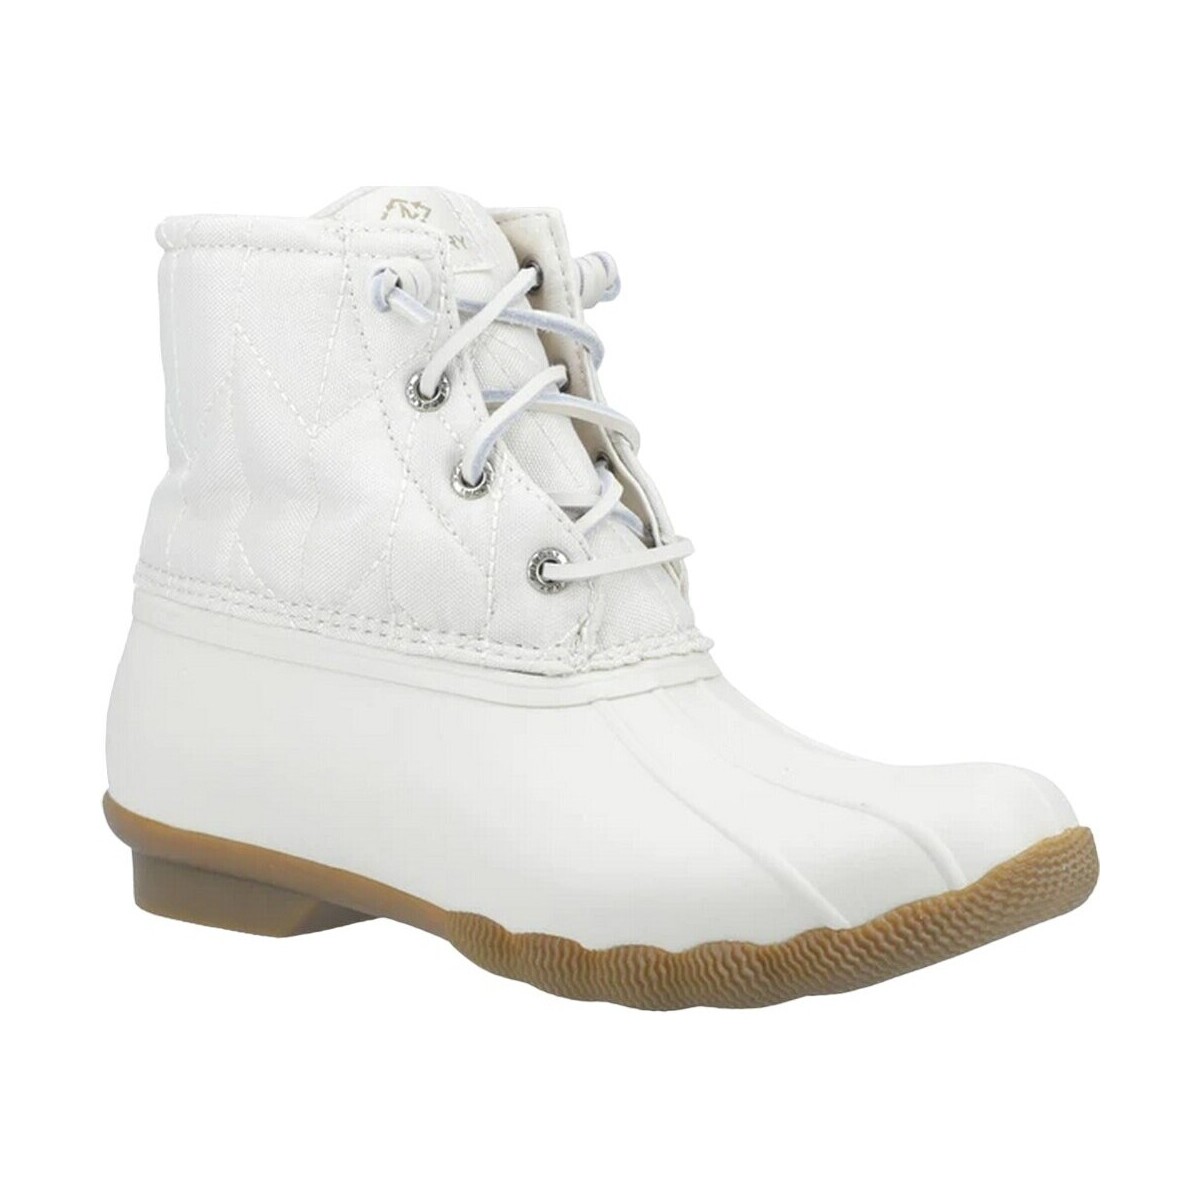 Zapatos Mujer Botas Sperry Top-Sider Saltwater Seacycled Blanco